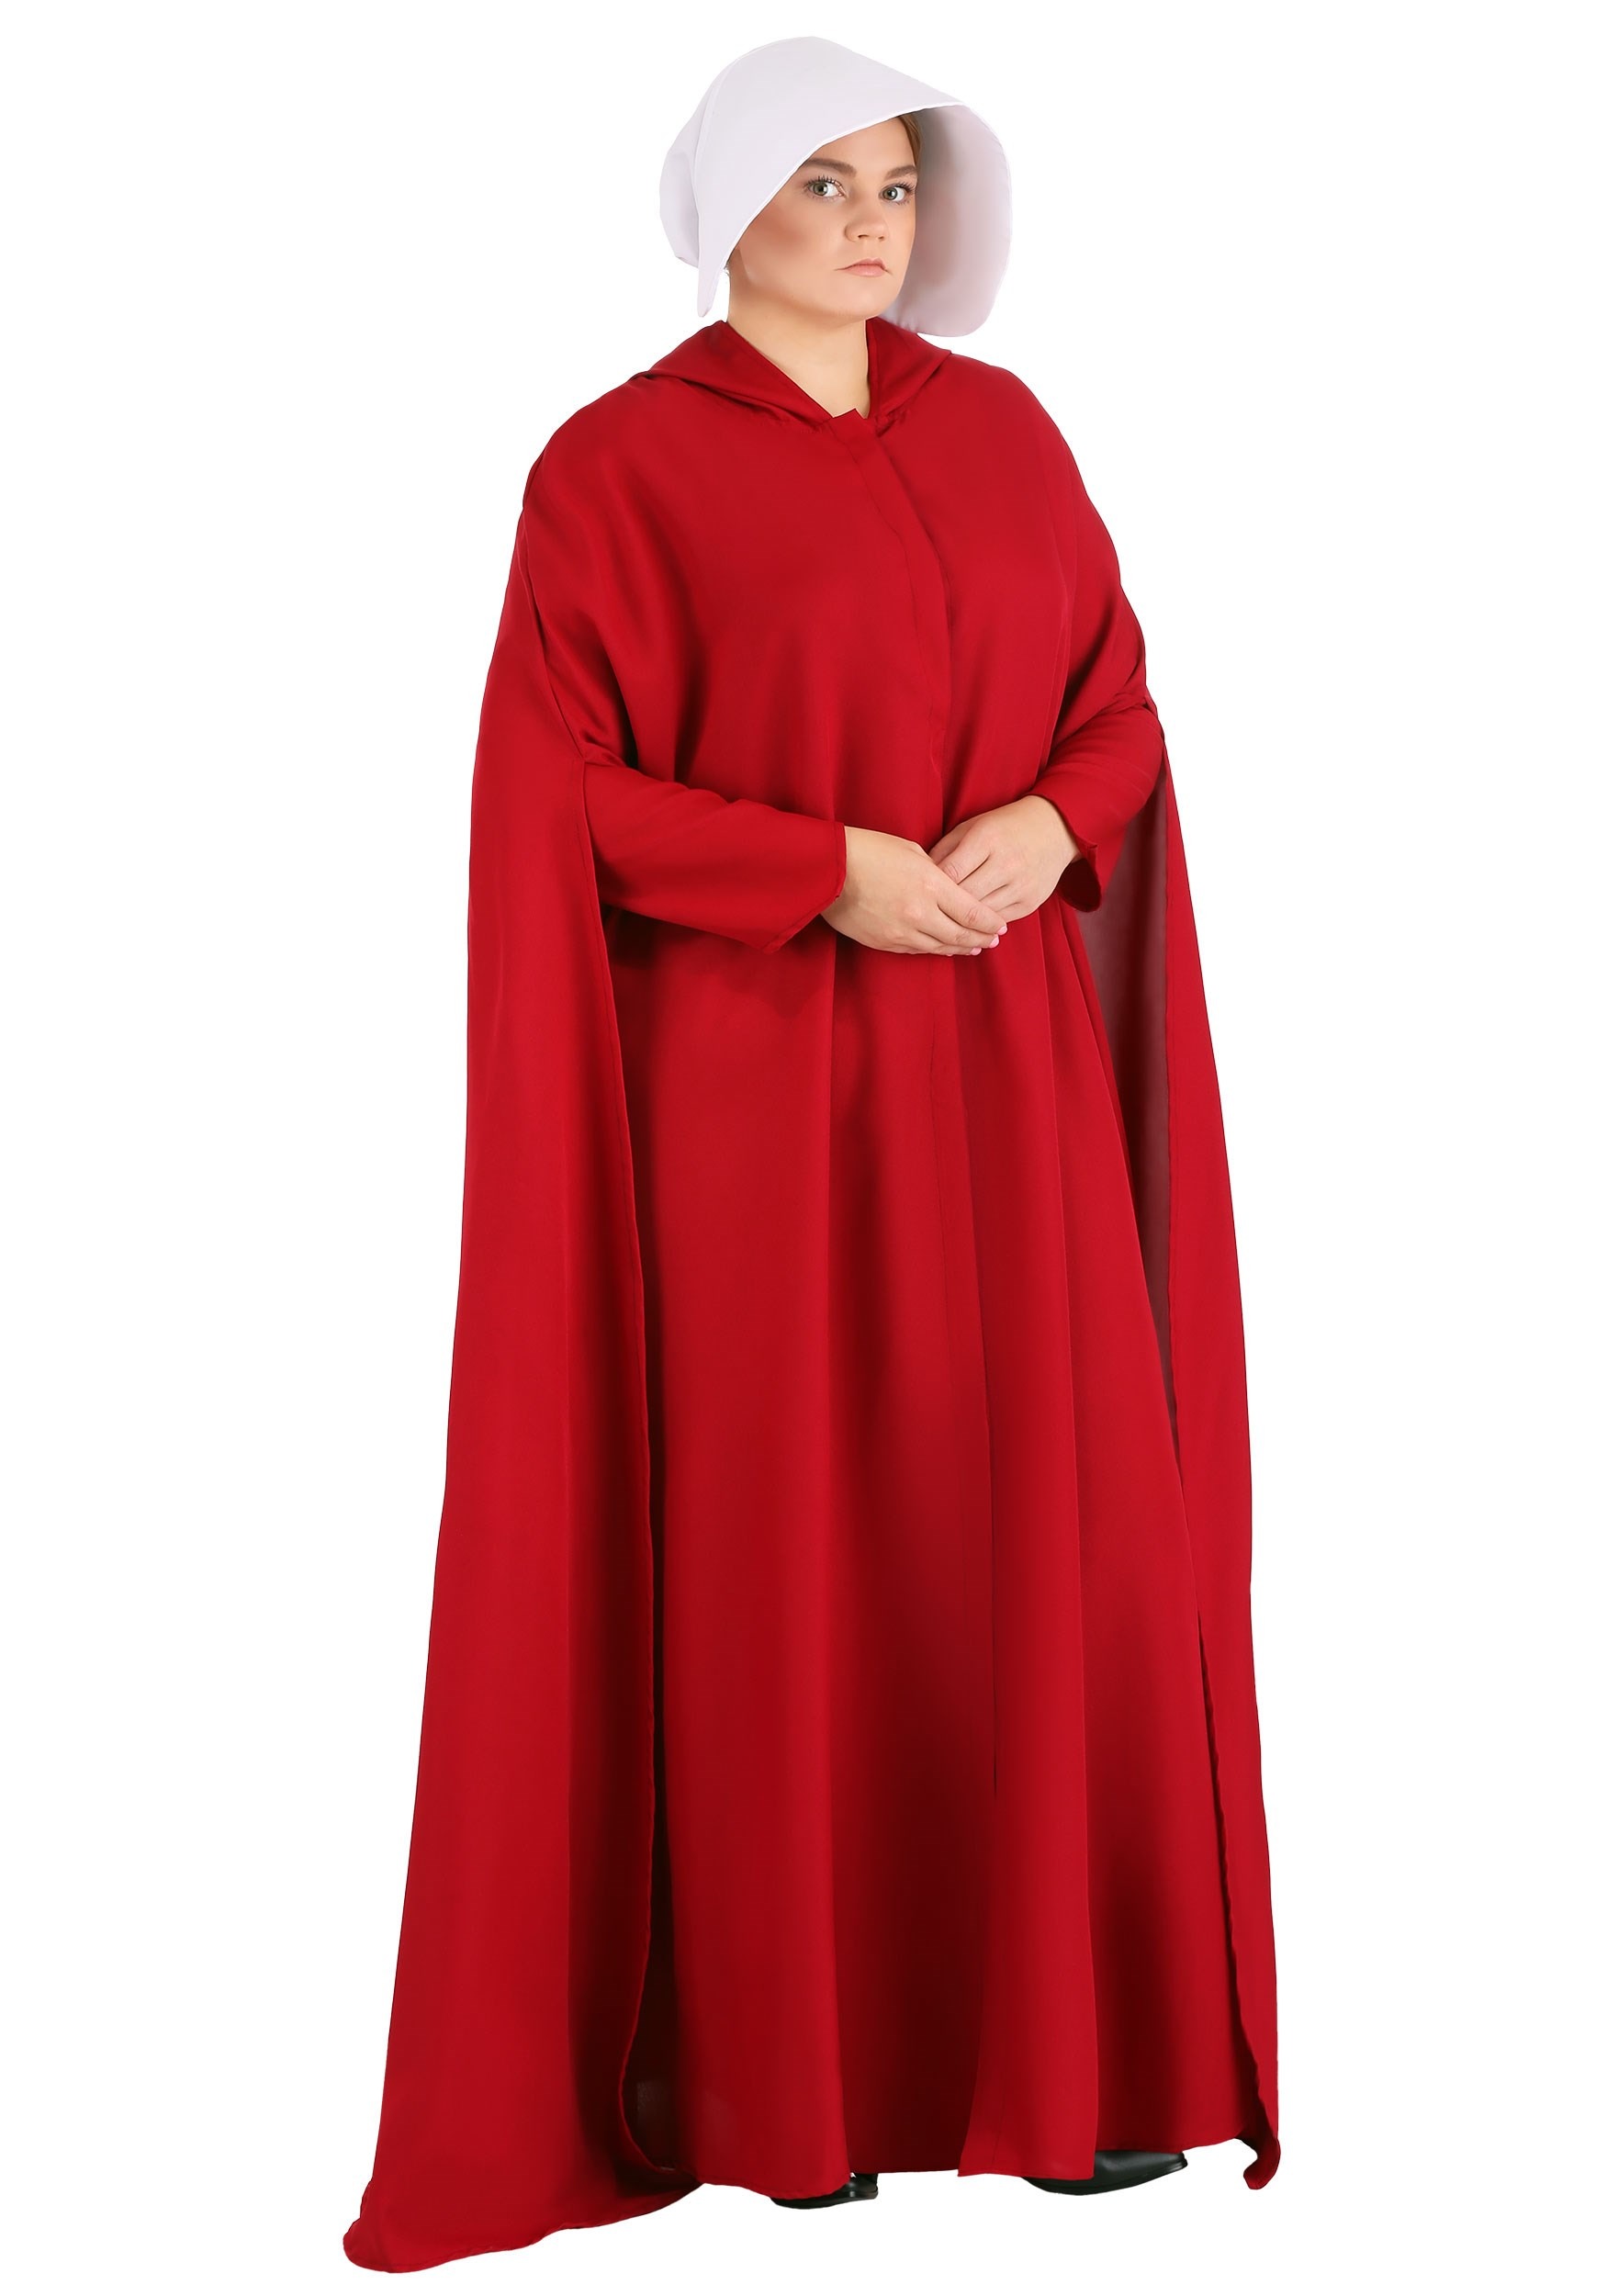 Photos - Fancy Dress FUN Costumes Plus Size Handmaid's Tale Costume for Women | Exclusive Red&#